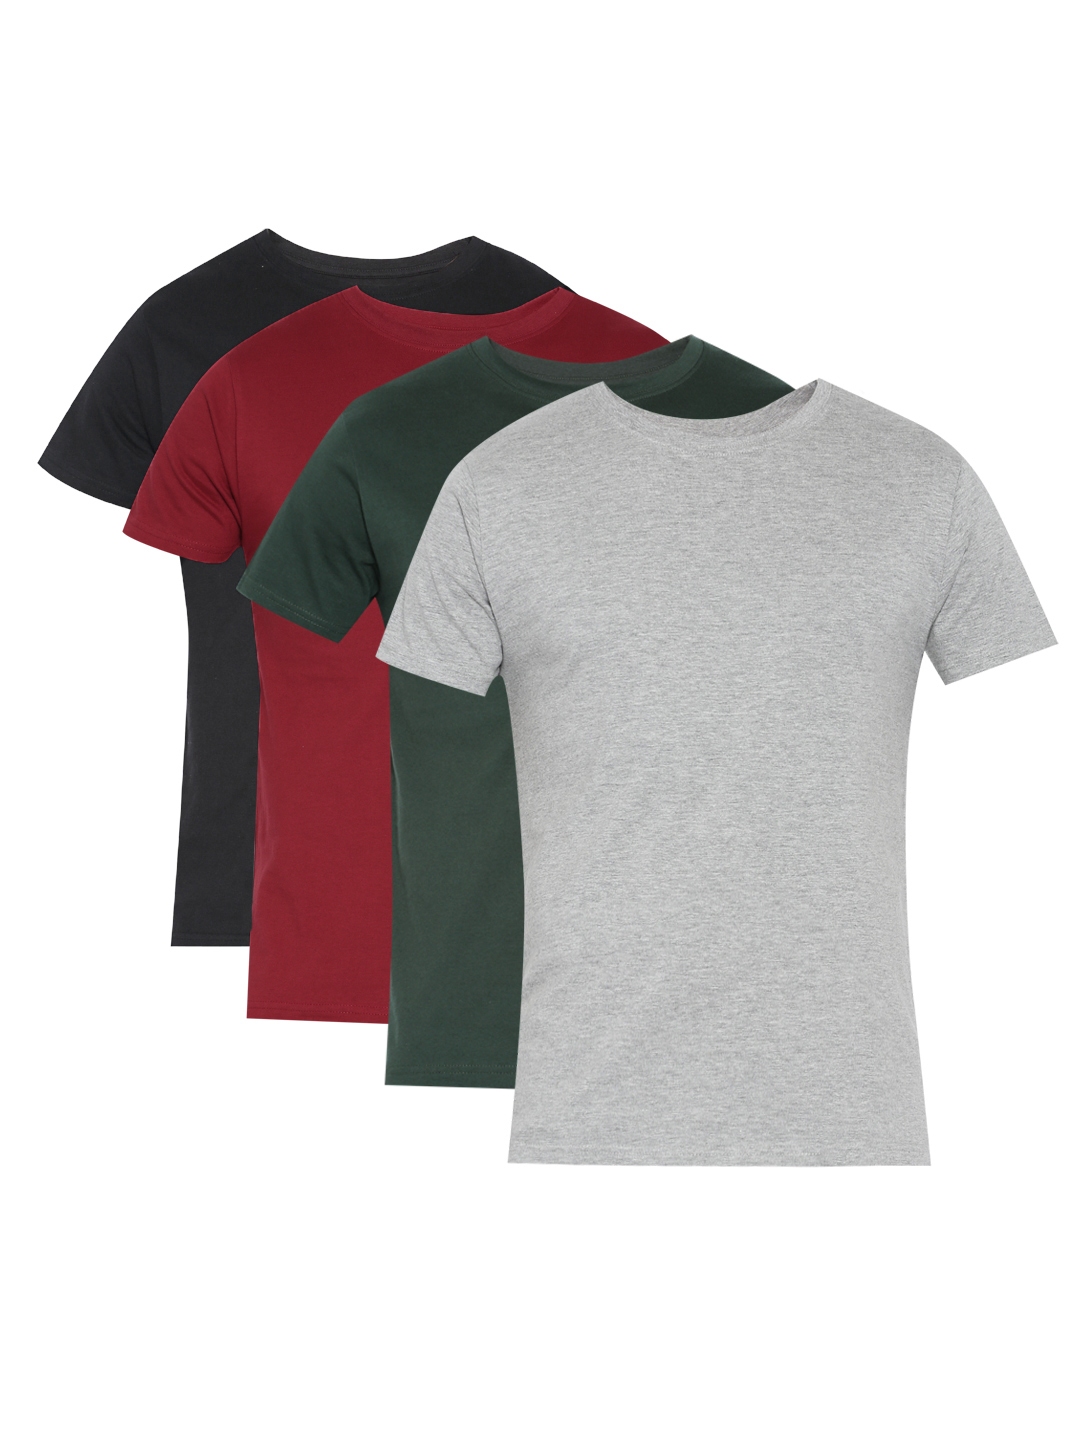 Buy Aventura Outfitters Pack Of 4 T Shirts - Tshirts for Men 1728423 ...